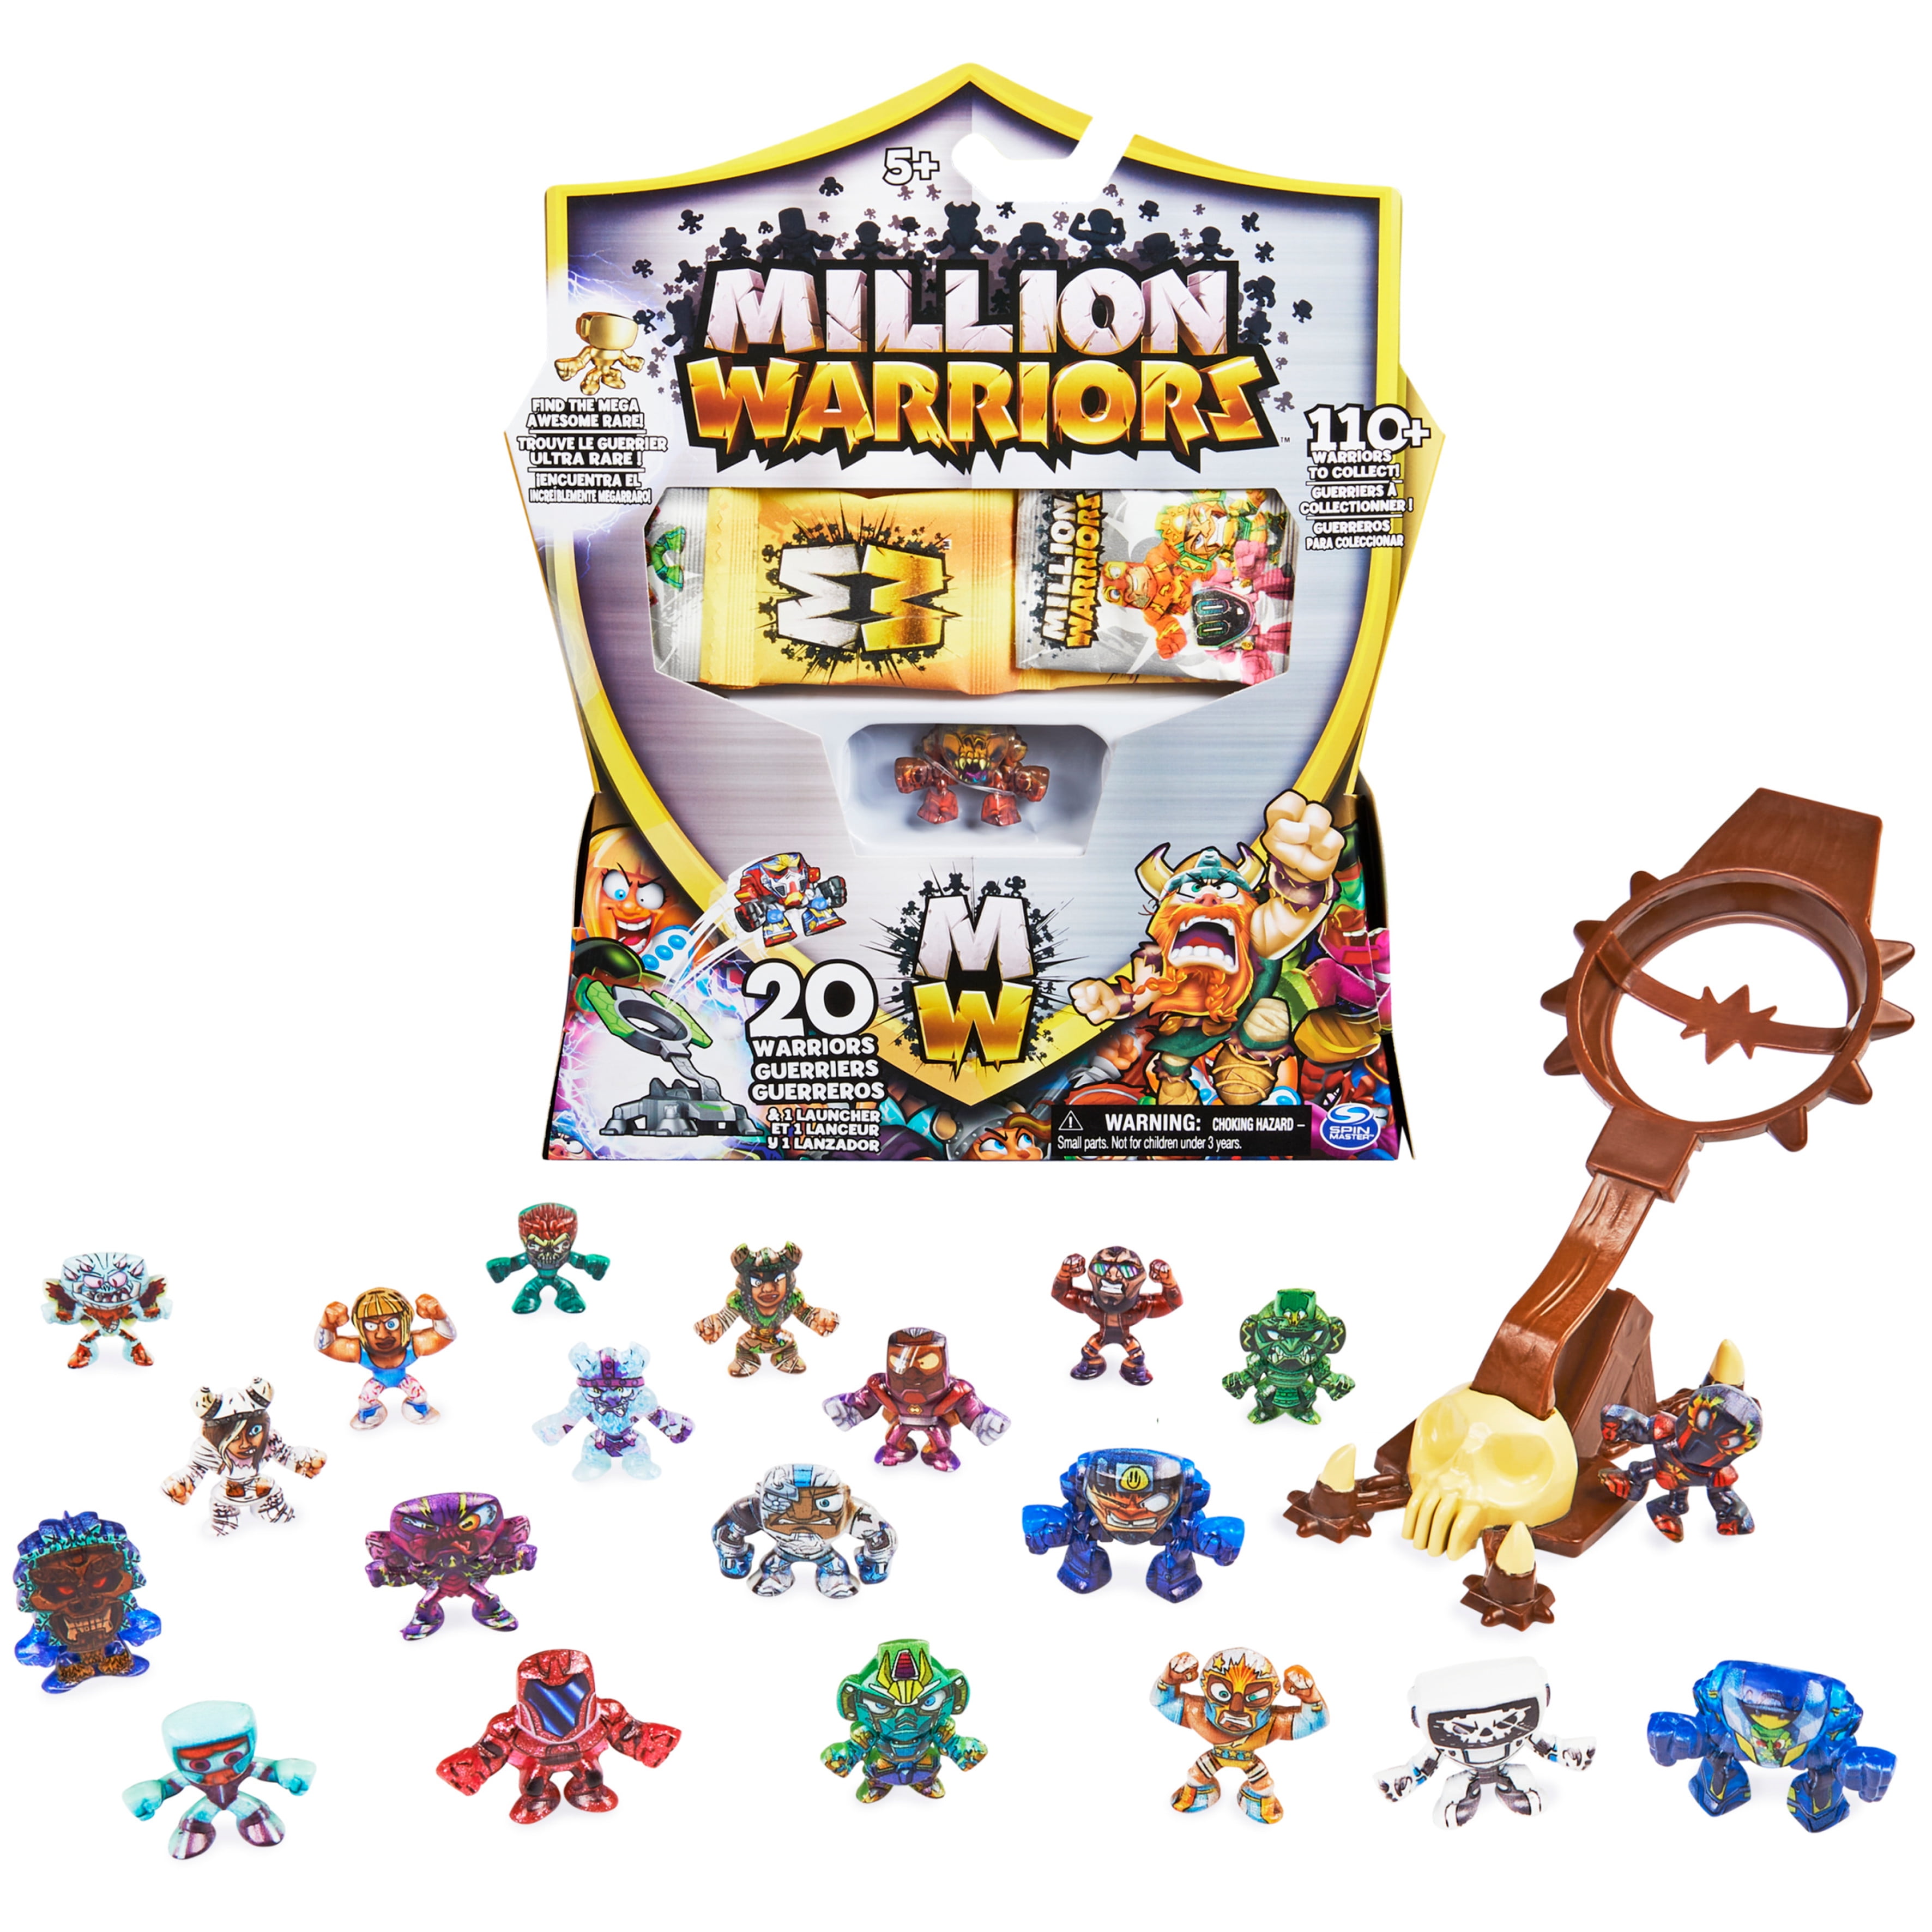 Million Warriors 20-Pack Collectibles Figures with Rare